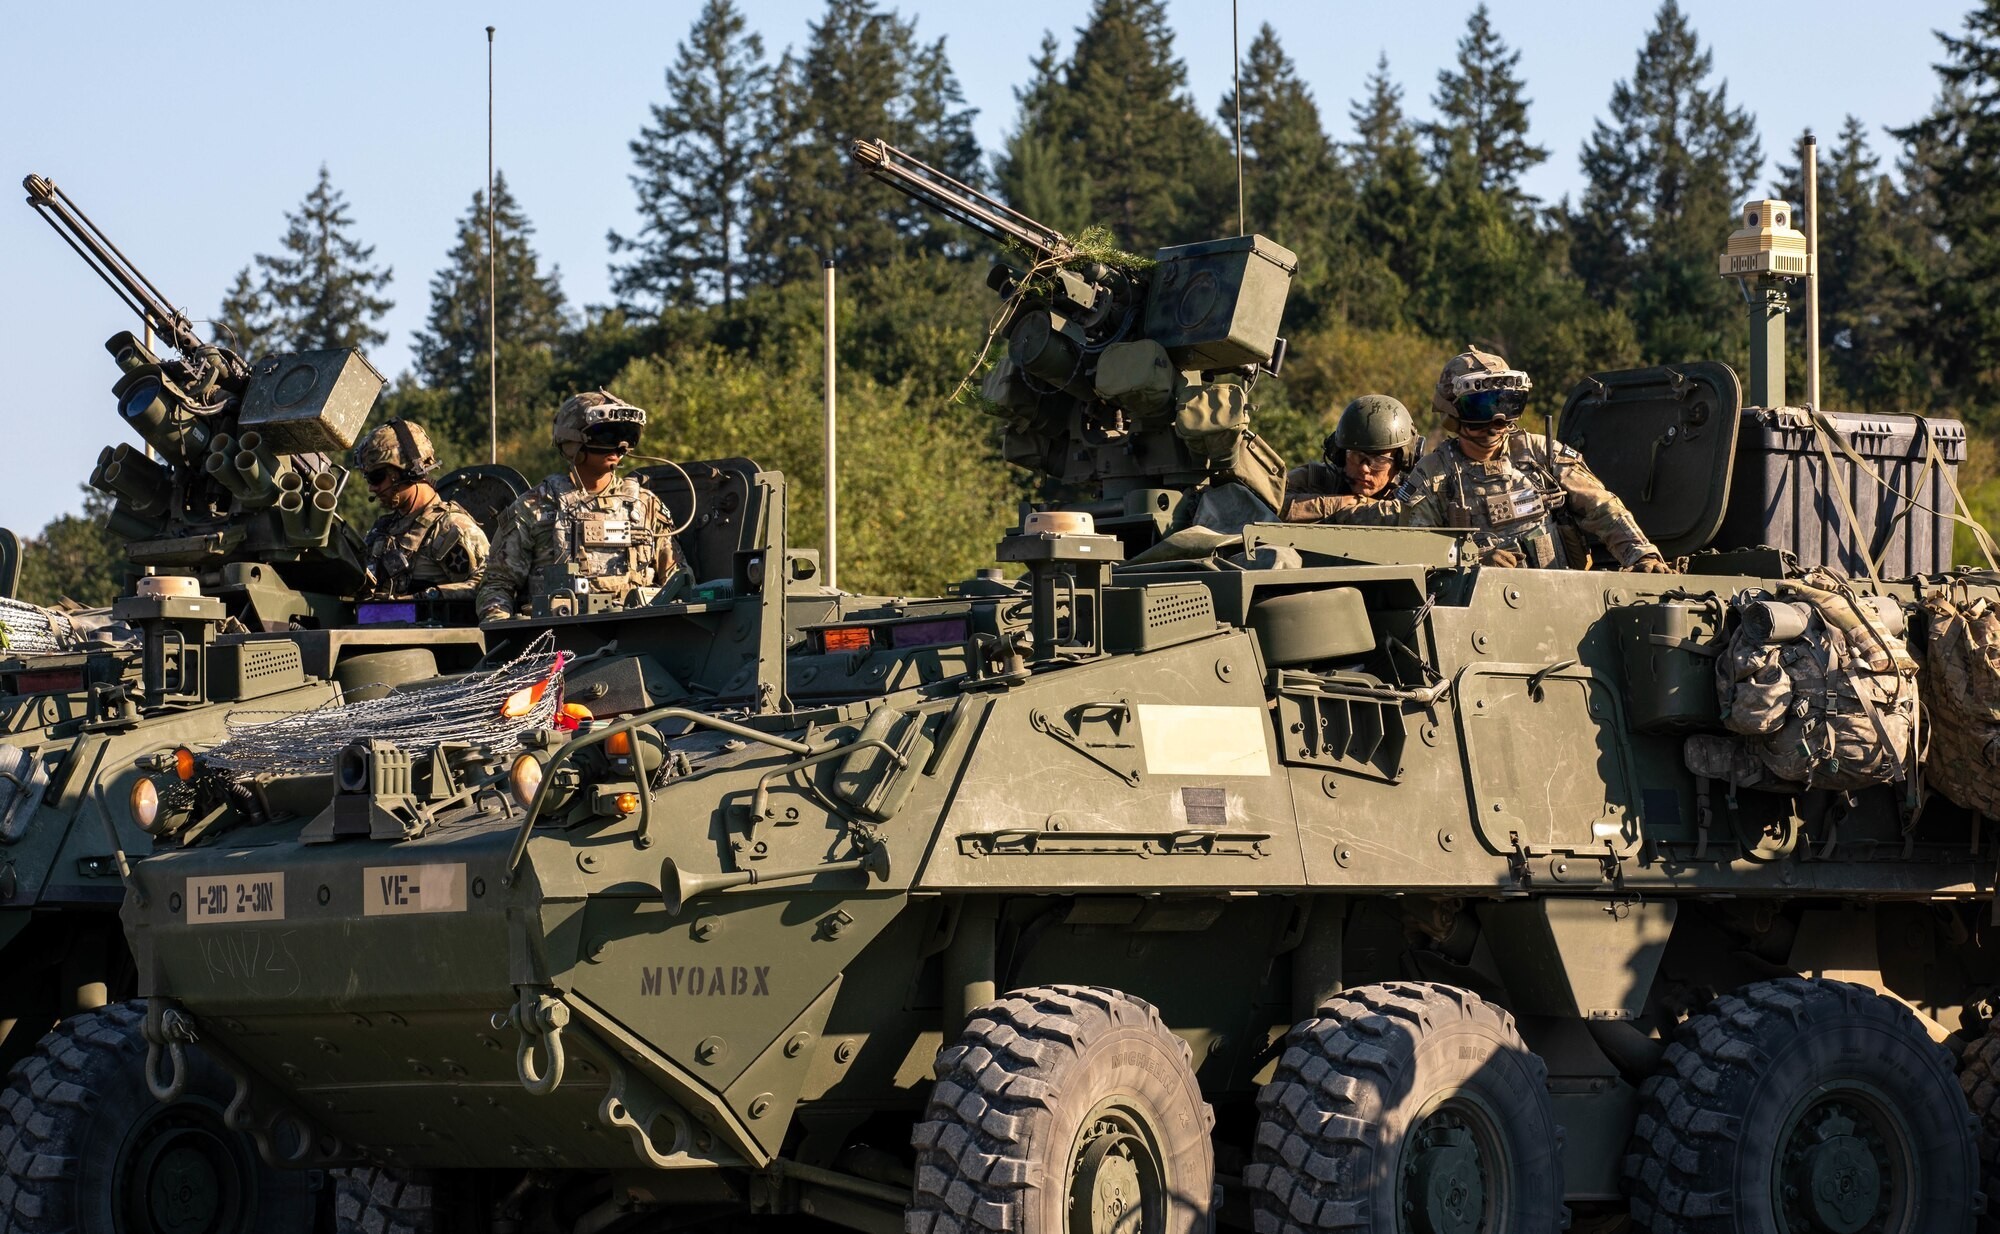 Stryker armored vehicles